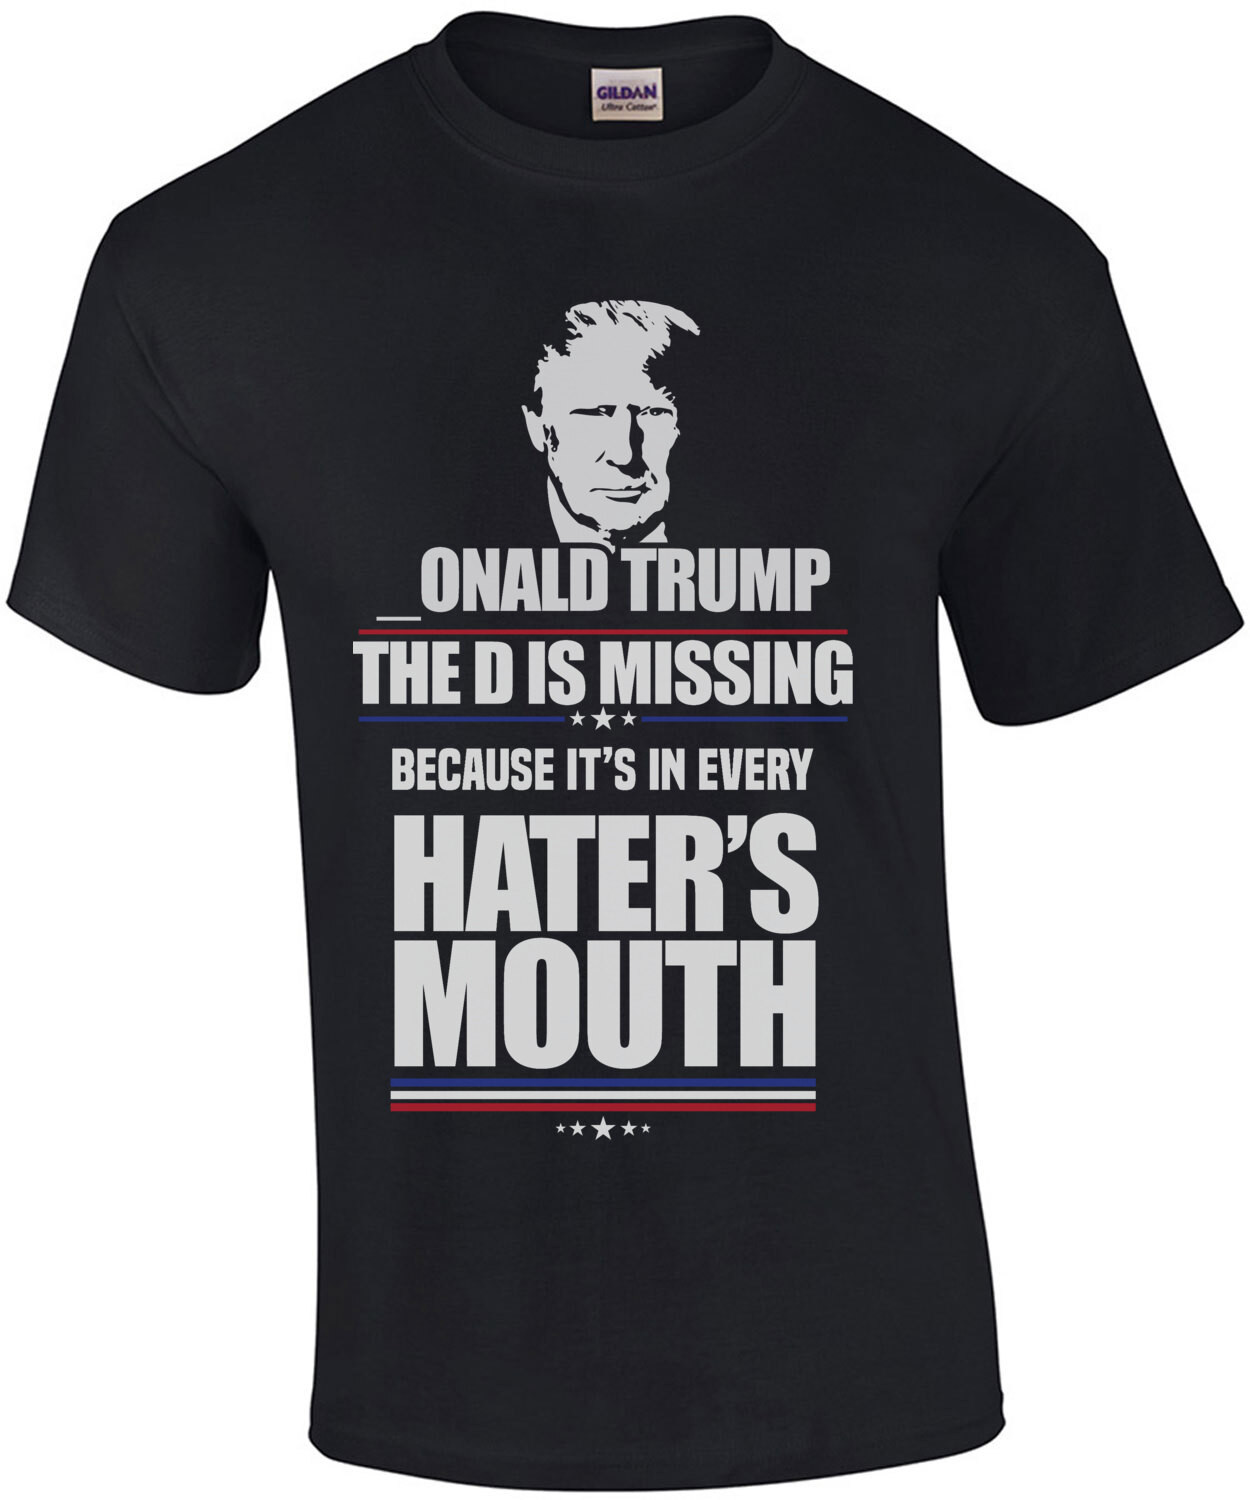 _onald Trump - The D is missing because it's in every hater's mouth - funny pro trump t-shirt